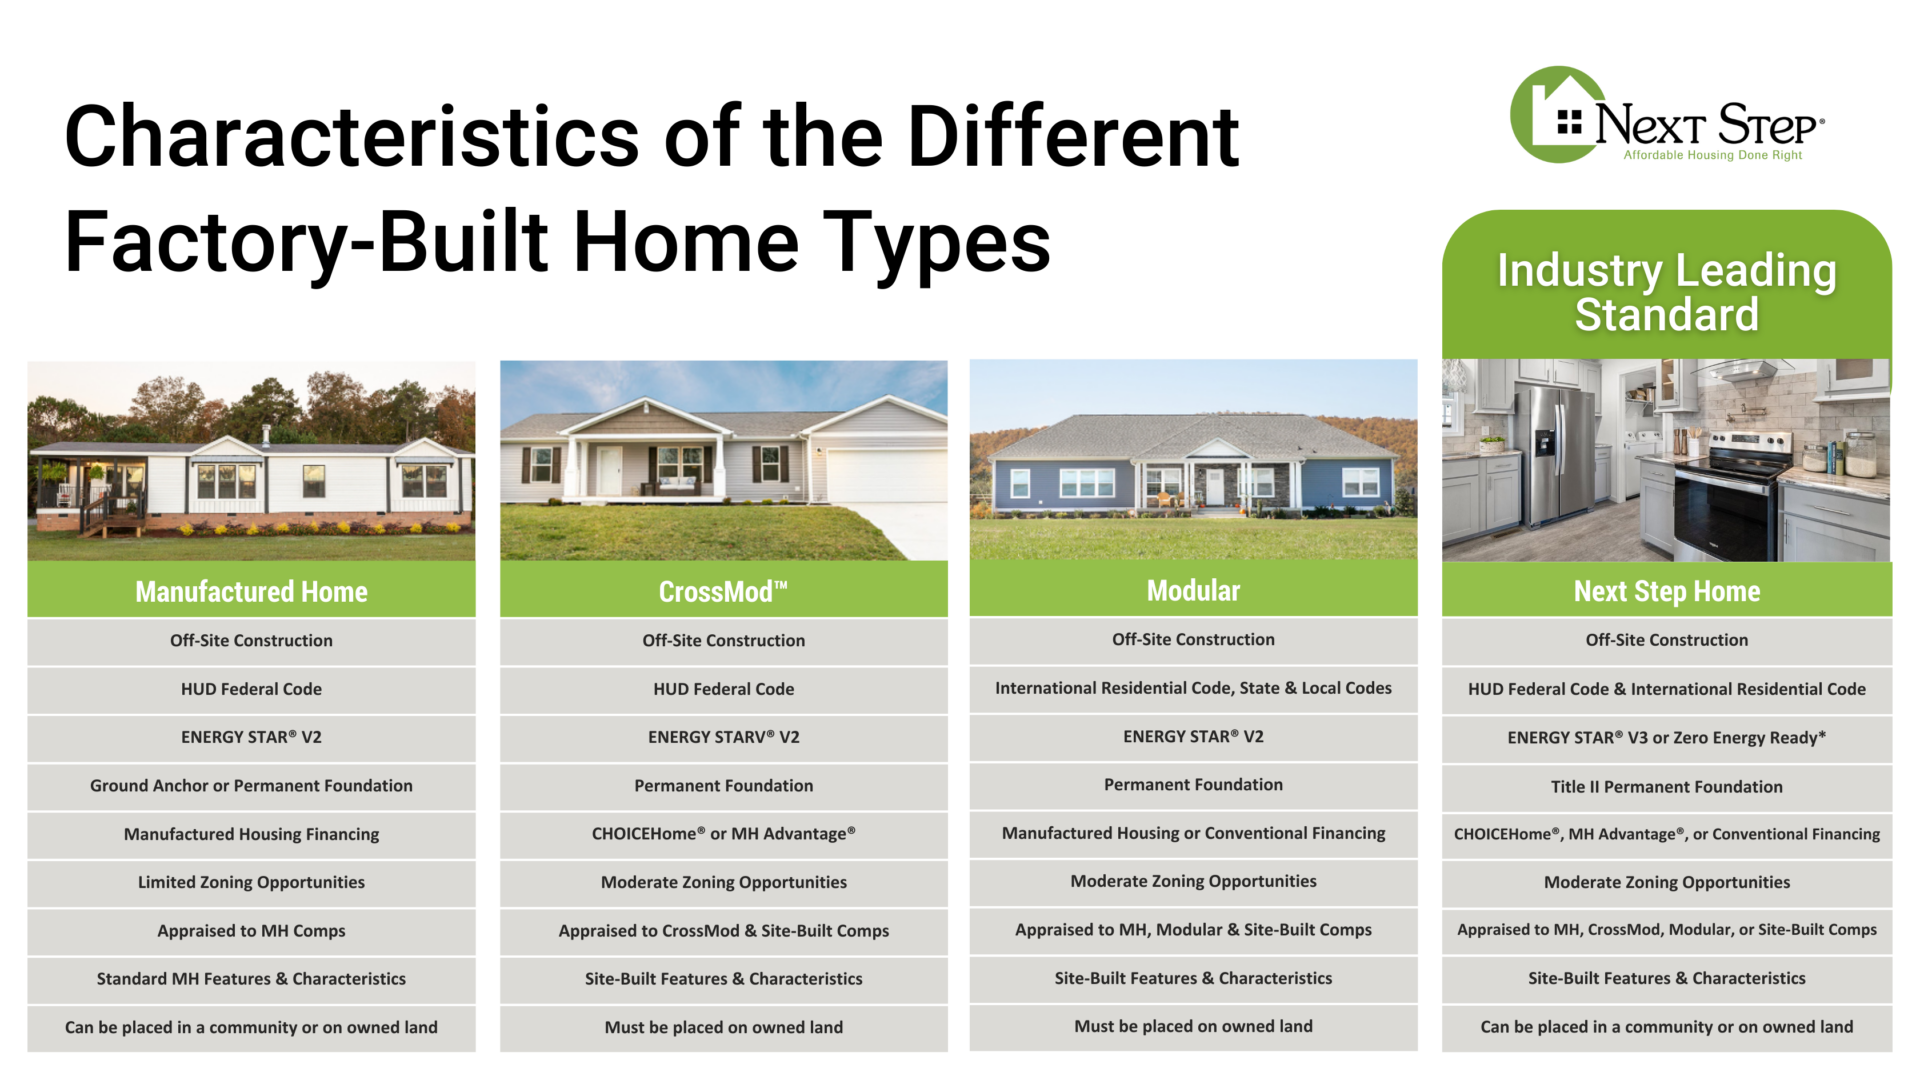 A side-by-side comparison of four factory-built home types, including the industry-leading Next Step Home.